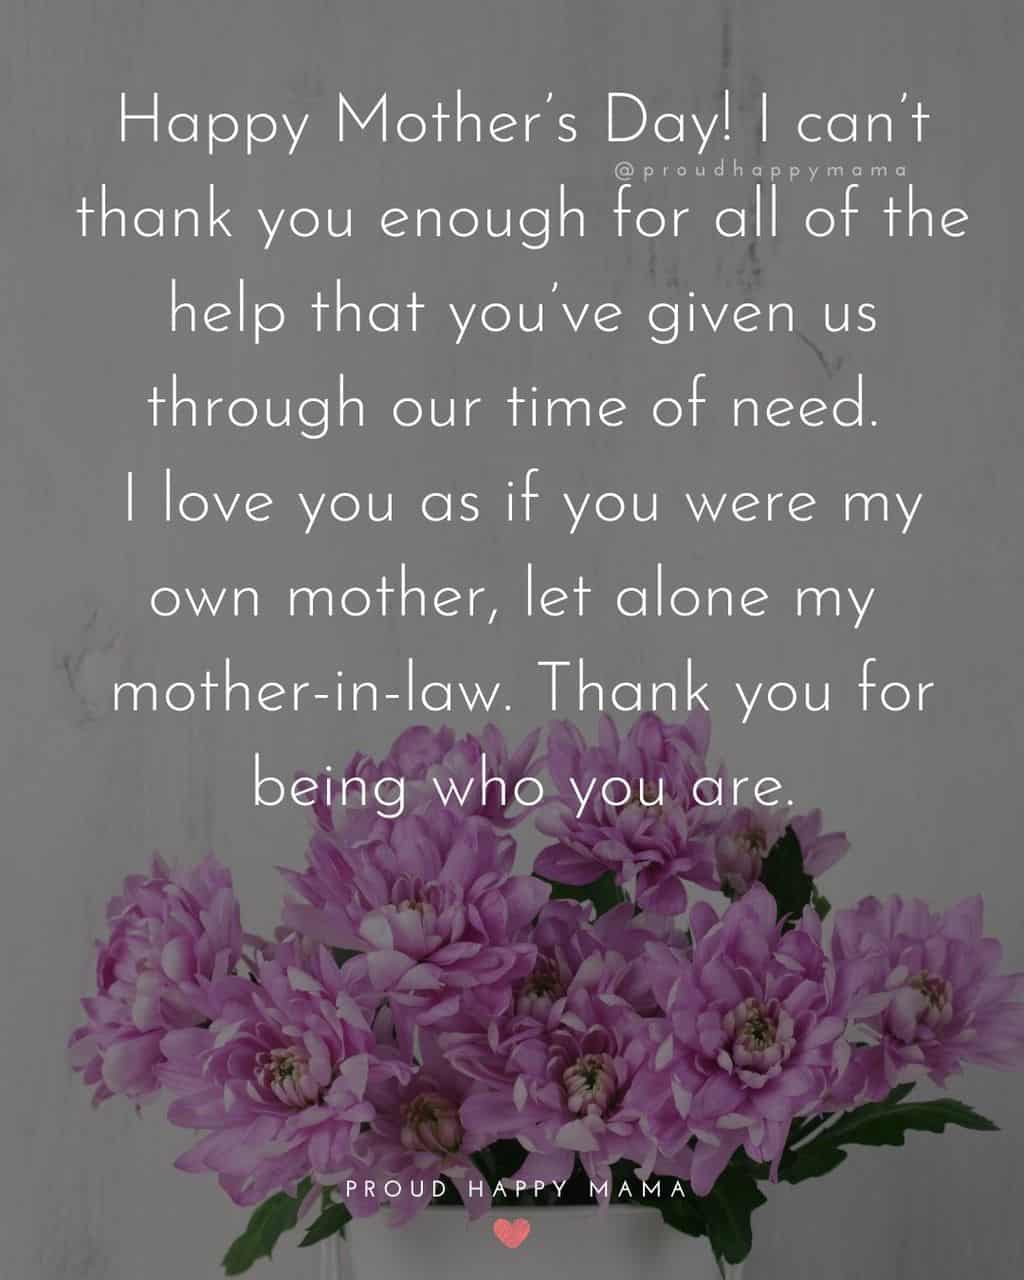 Happy Mothers Day Quotes For Mother In Law - Happy Mother’s Day! I can’t thank you enough for all of the help that you’ve given us